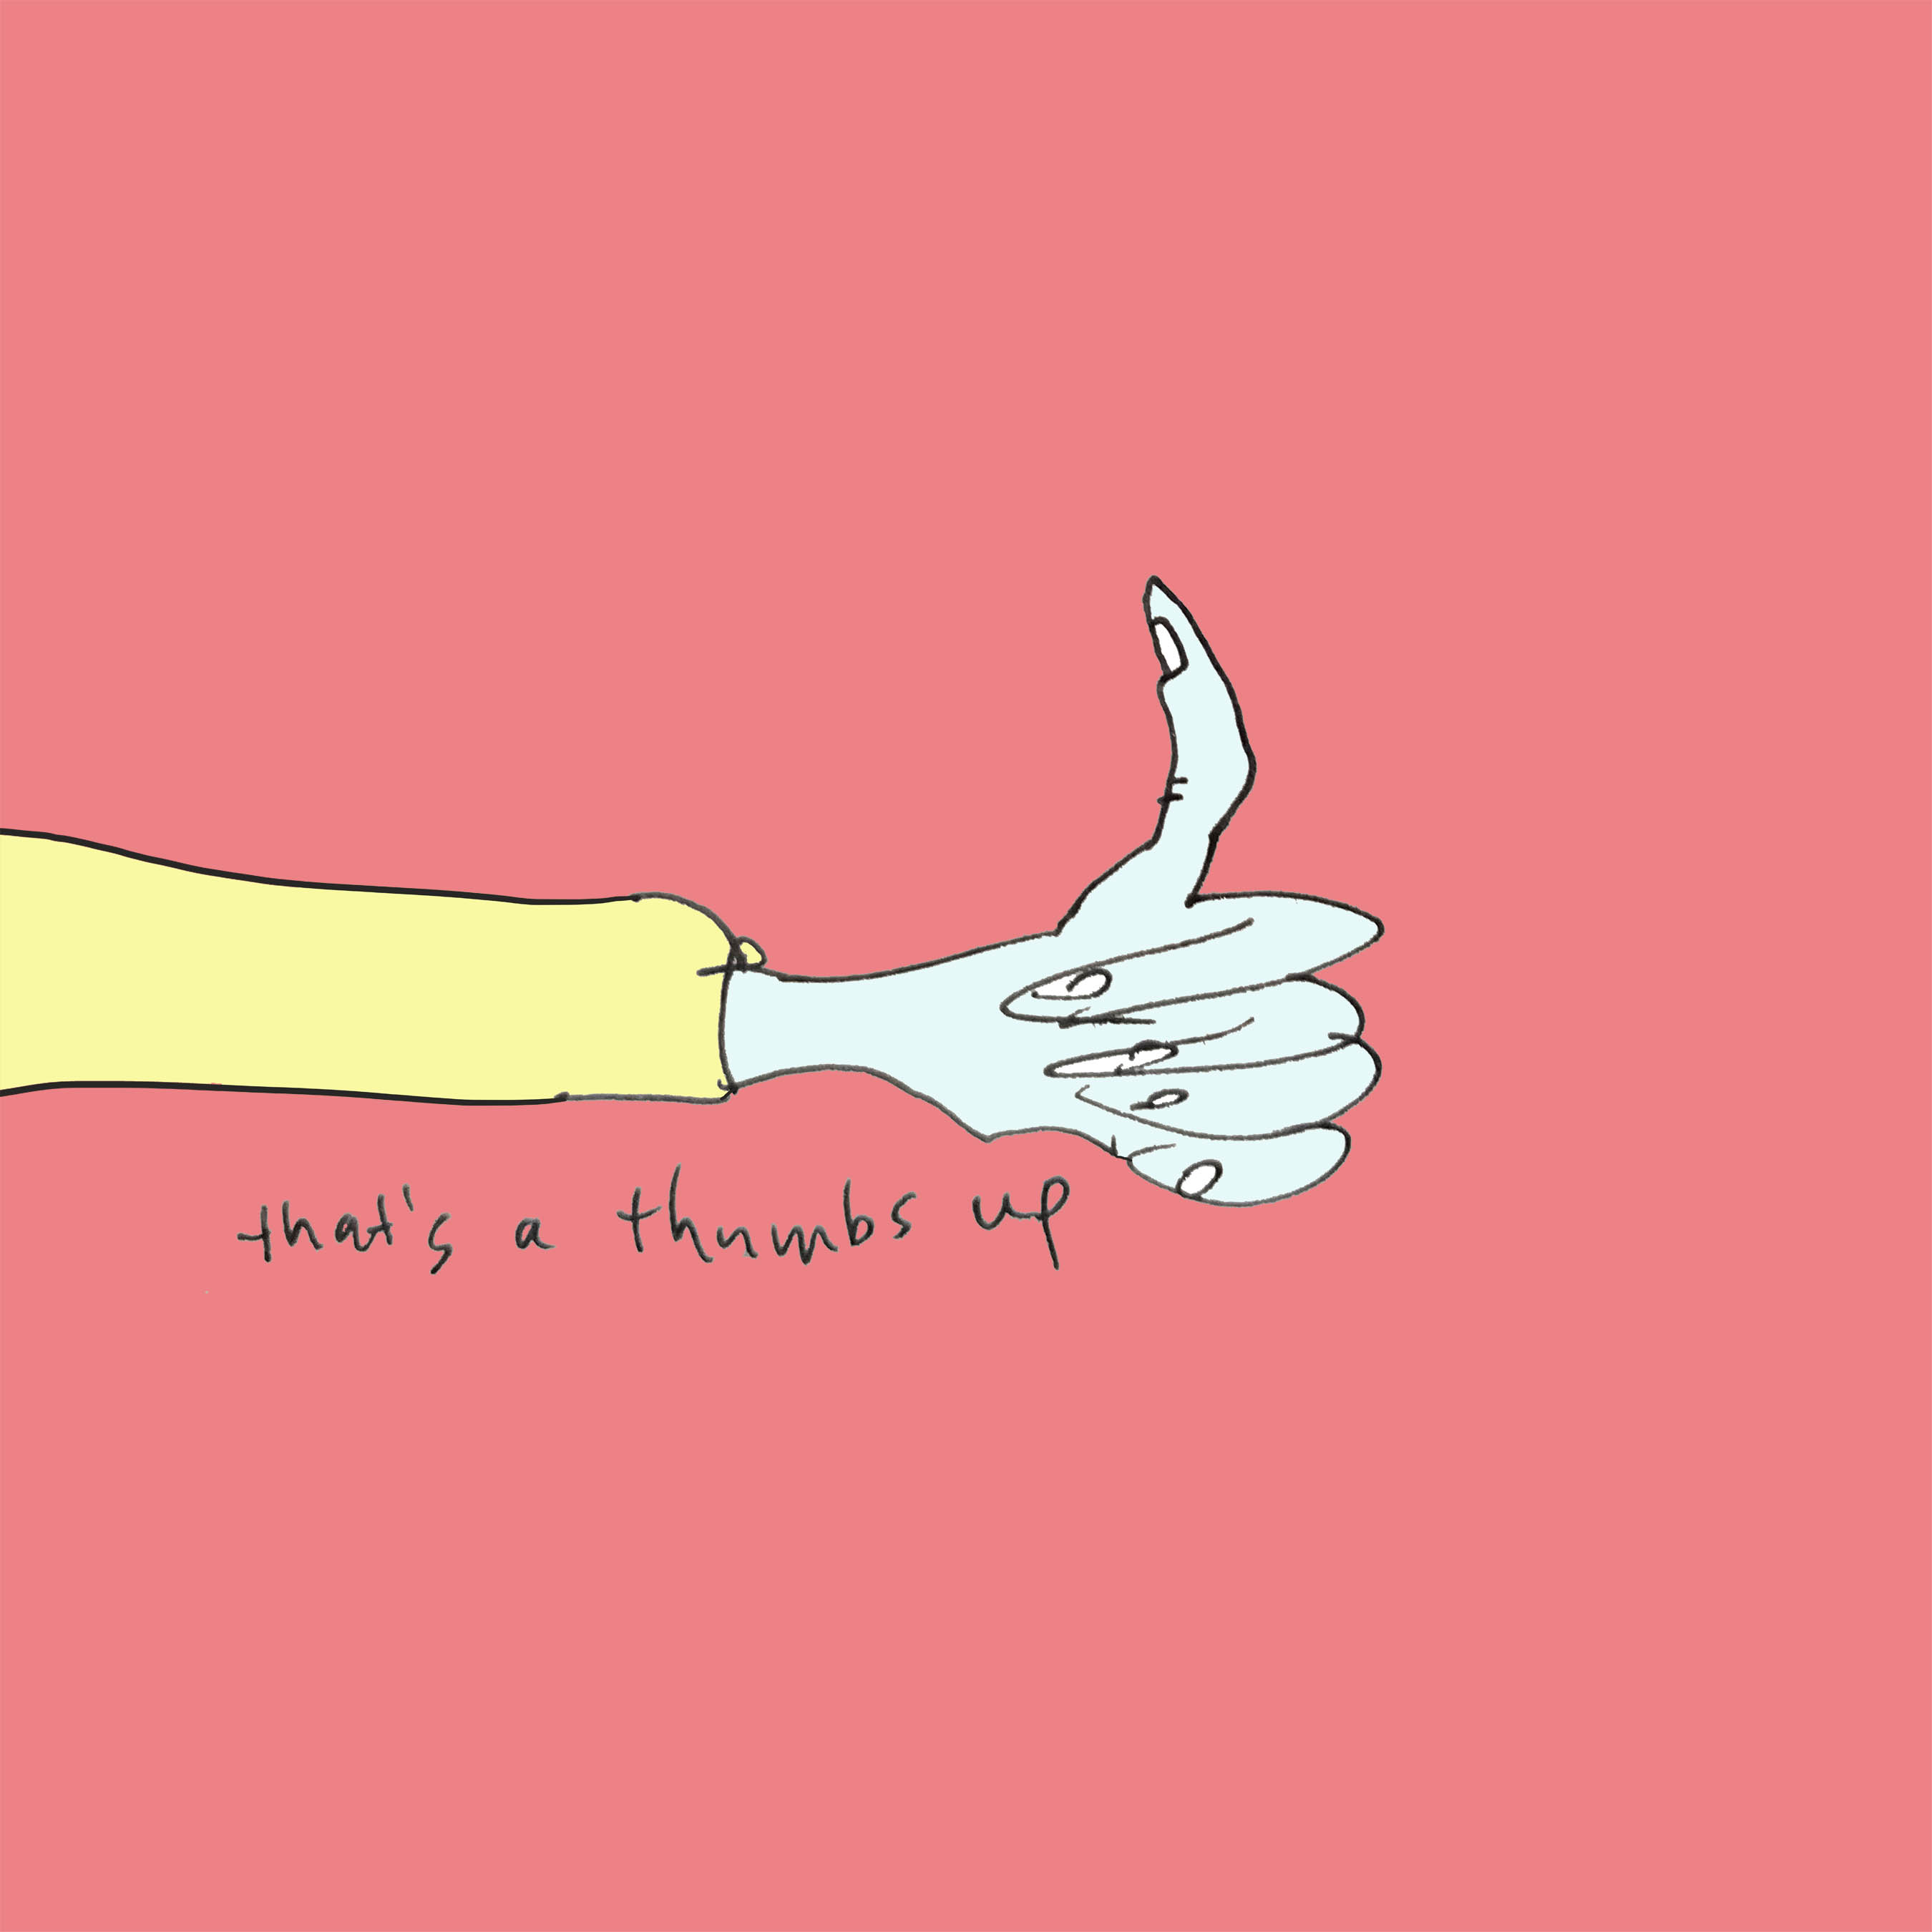 art every day number 396 thumbs up yes good illustration